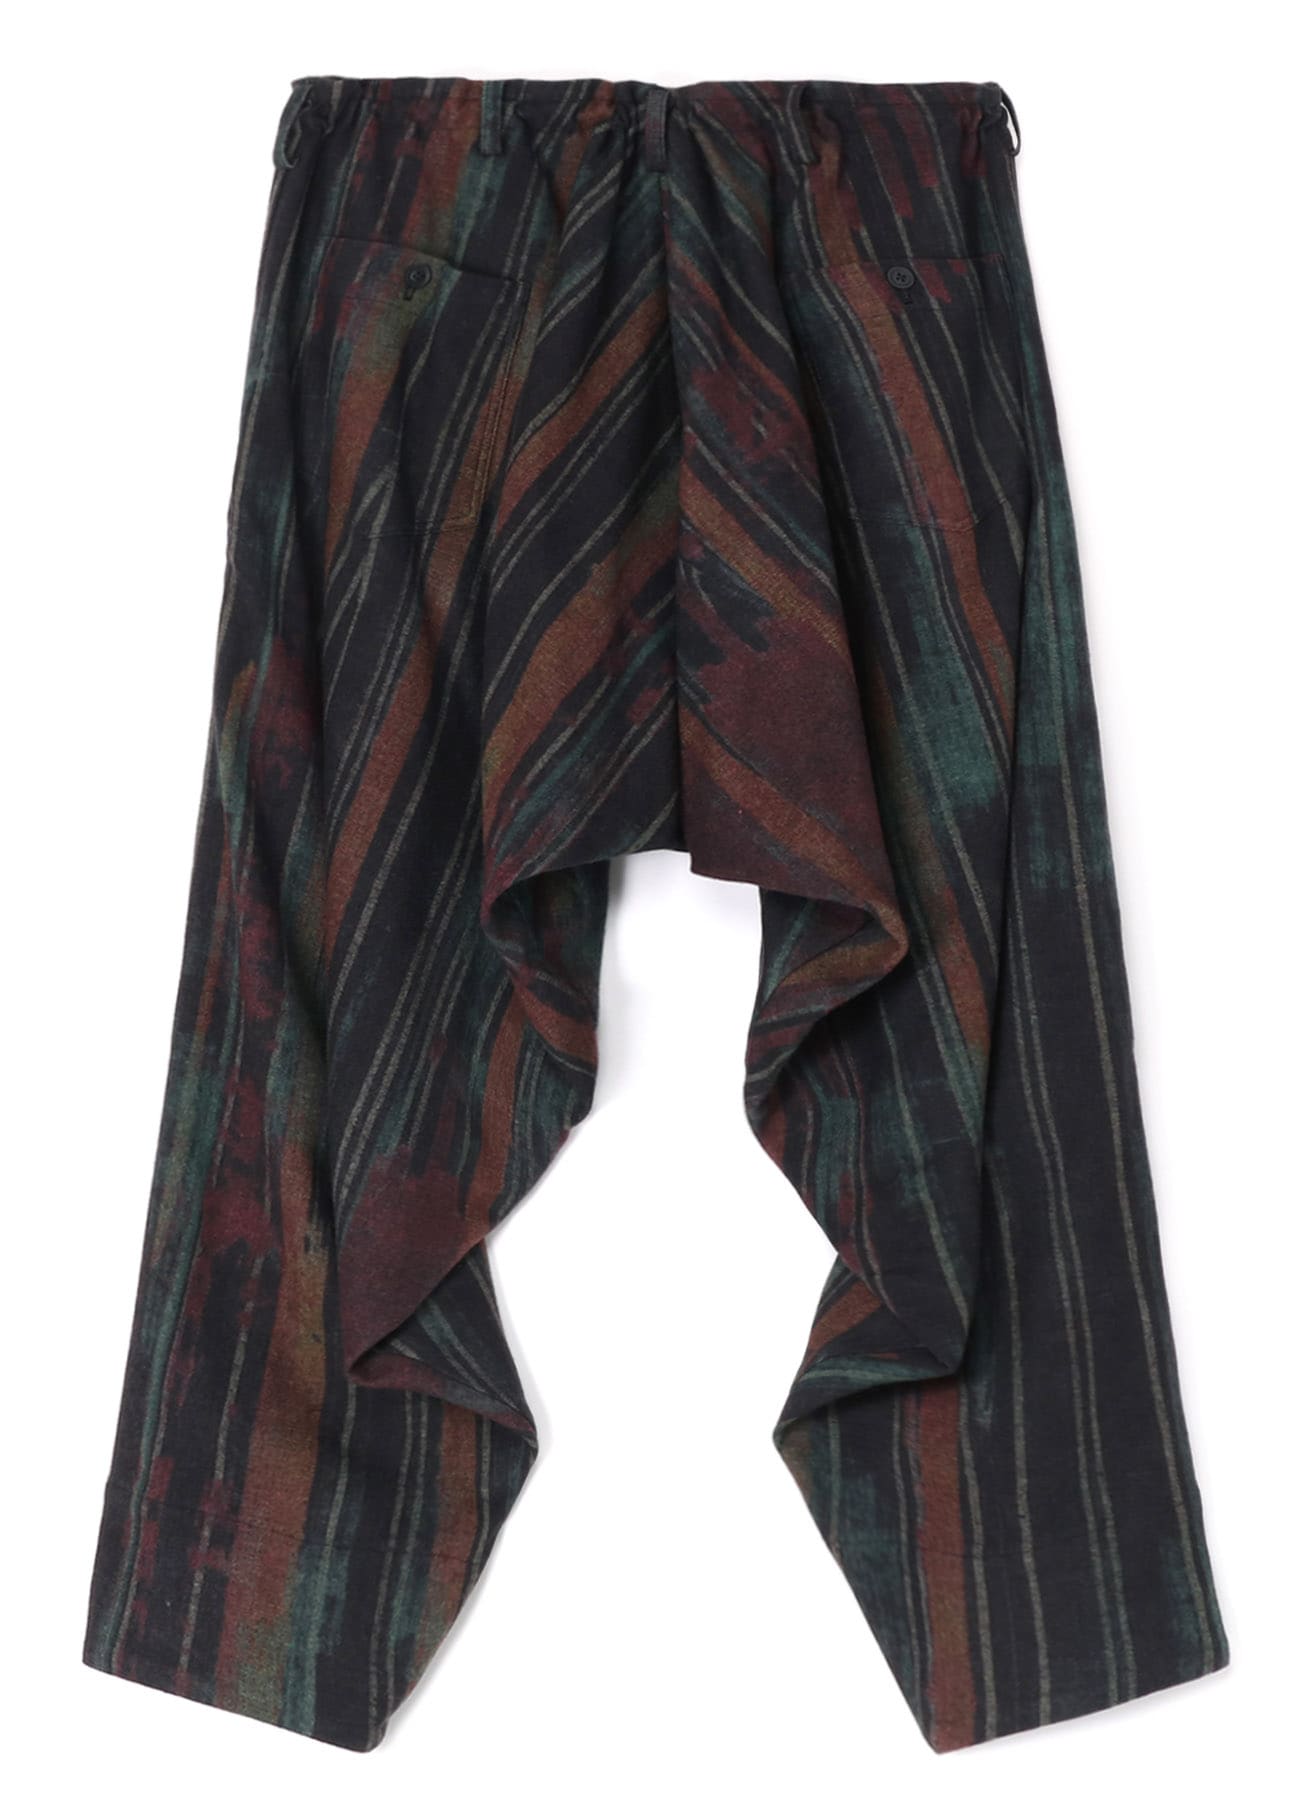 ABSTRACT STRIPE PATTERNED PANTS WITH SIDE ZIPPERS